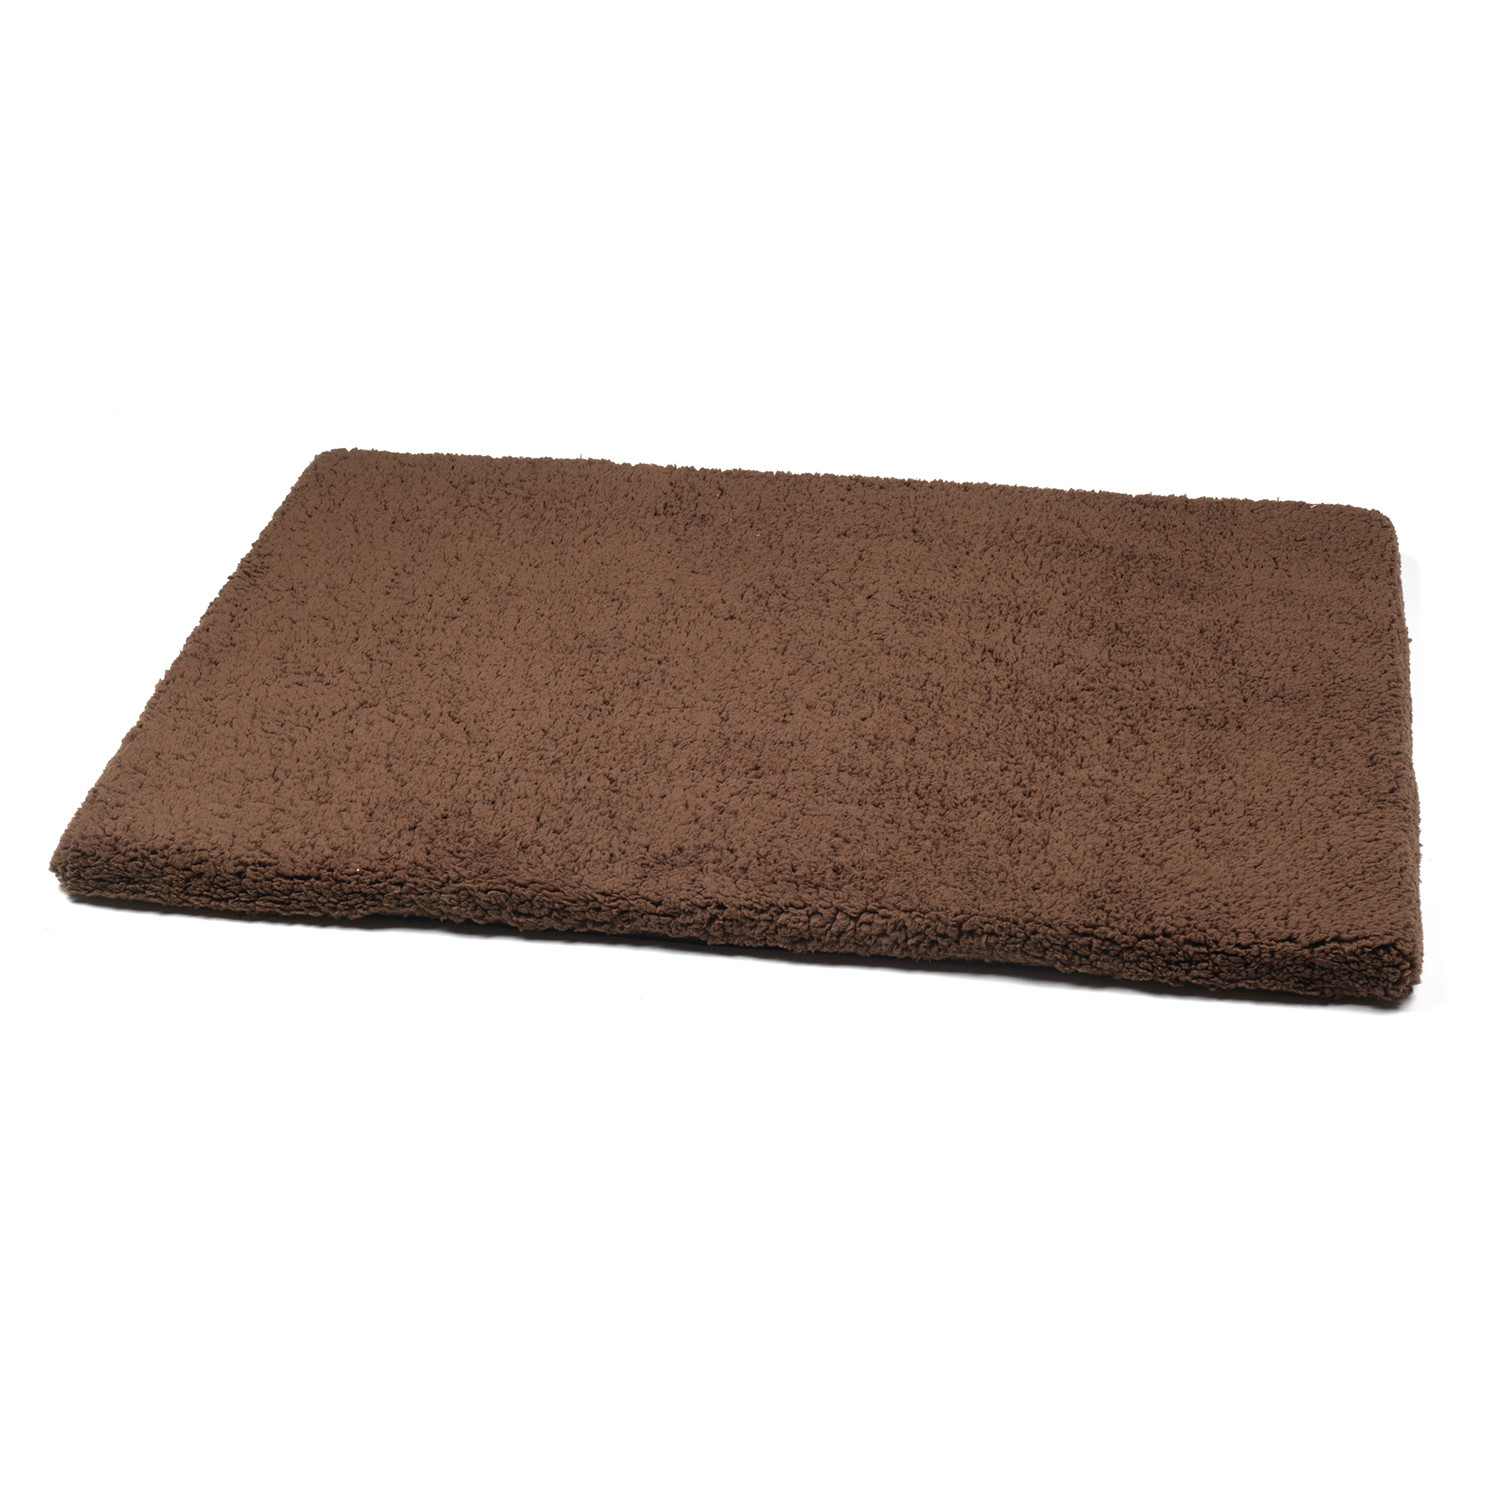 Single Clever Paws Fleece Memory Foam Soft Dog Bed in Assorted styles Image 1